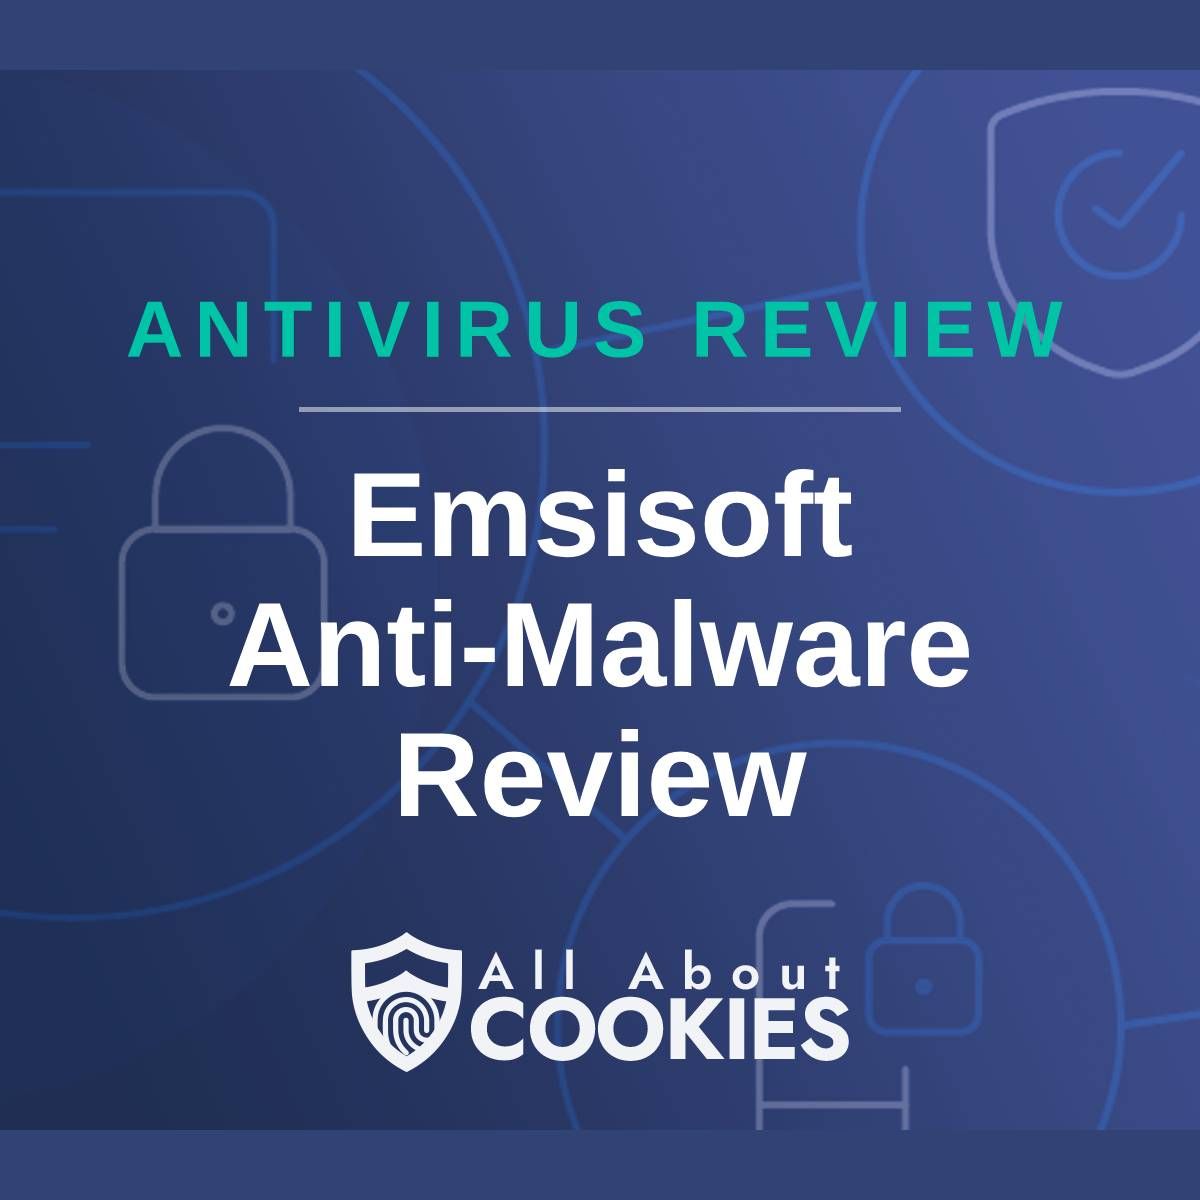 A blue background with images of locks and shields with the text &quot;Antivirus Review Emsisoft Anti-Malware Review&quot; and the All About Cookies logo. 